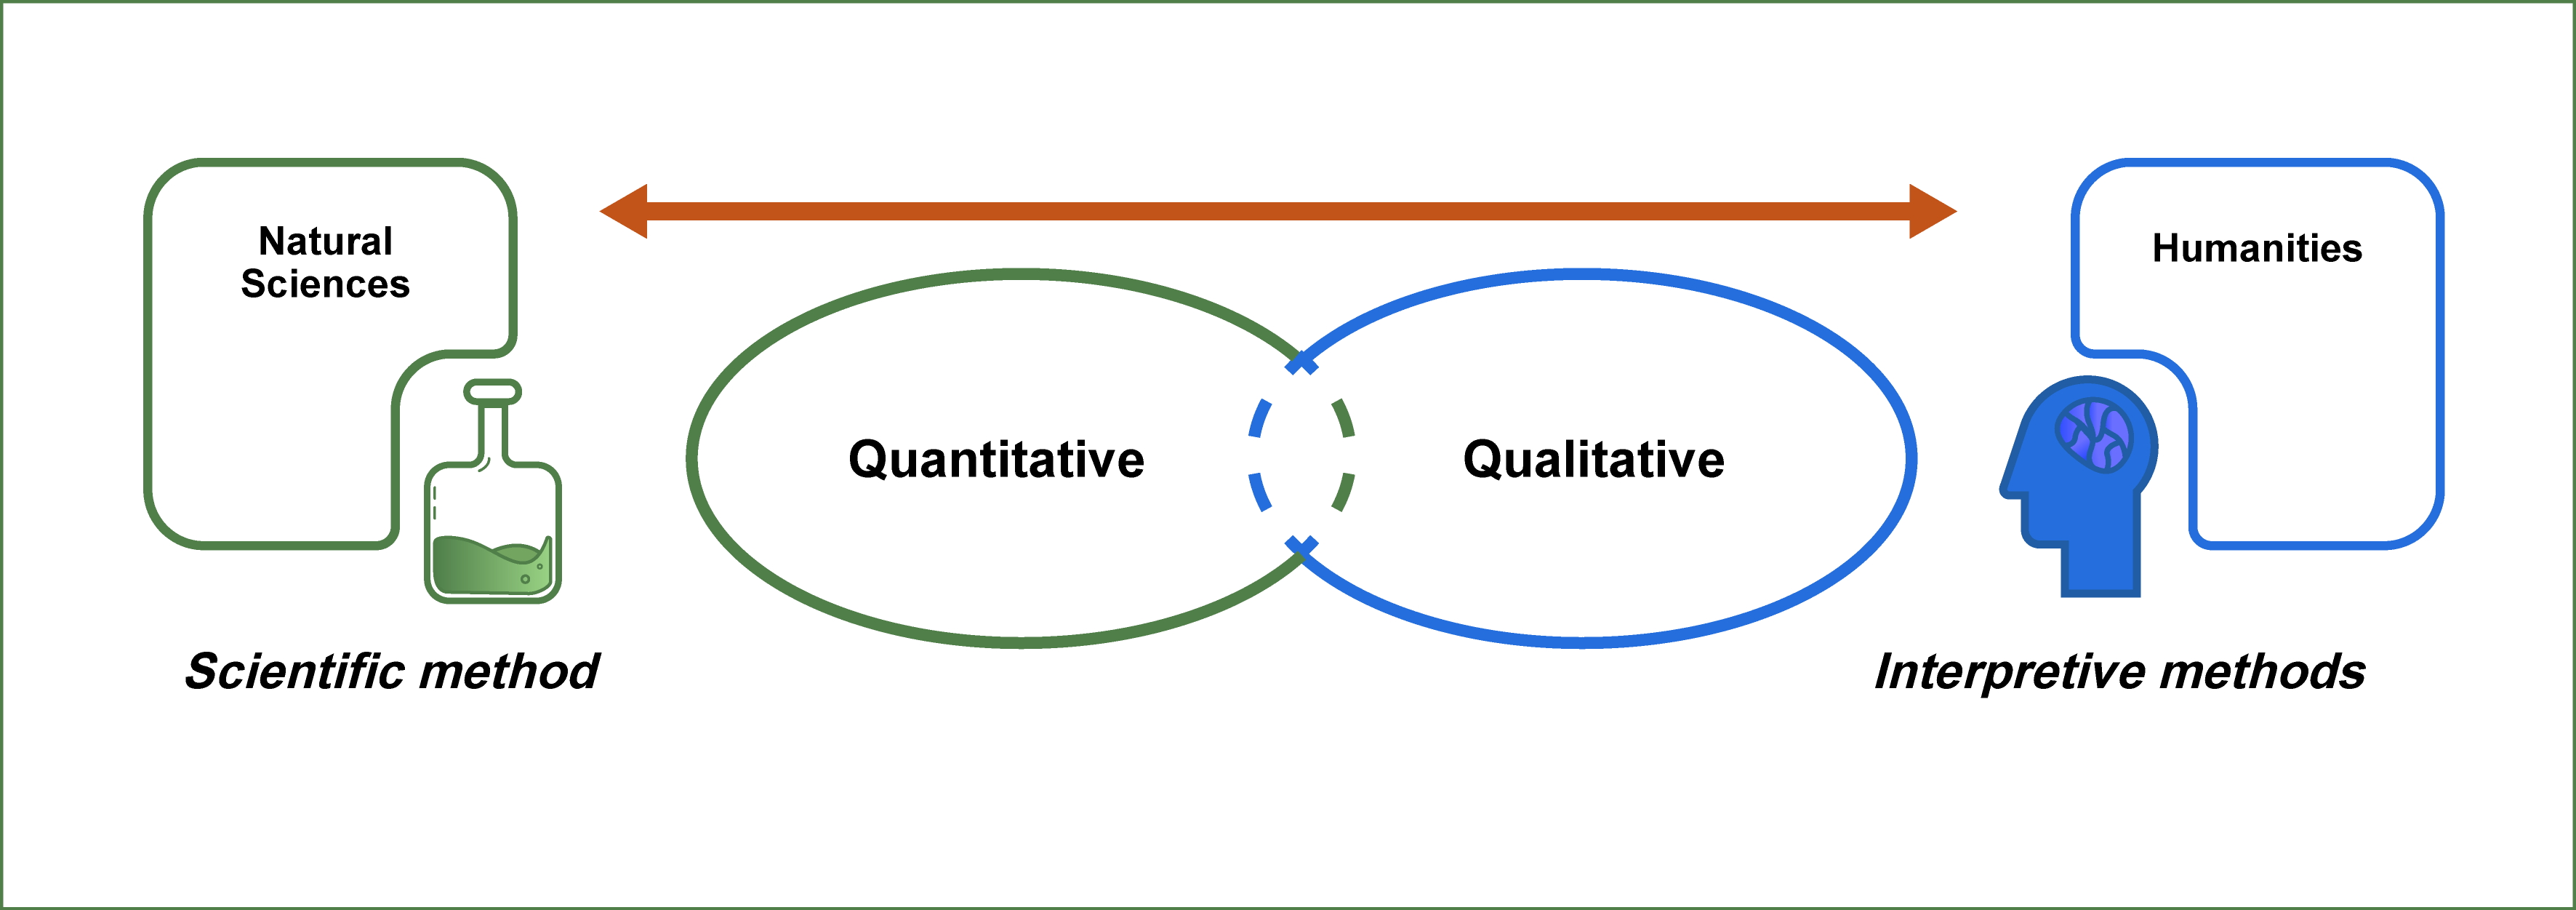 Natural Sciences are more likely to use the scientific method and be on the Quantitative side of the continuum. Humanities are more likely to use Interpretive methods and are on the Qualitative side of the continuum.